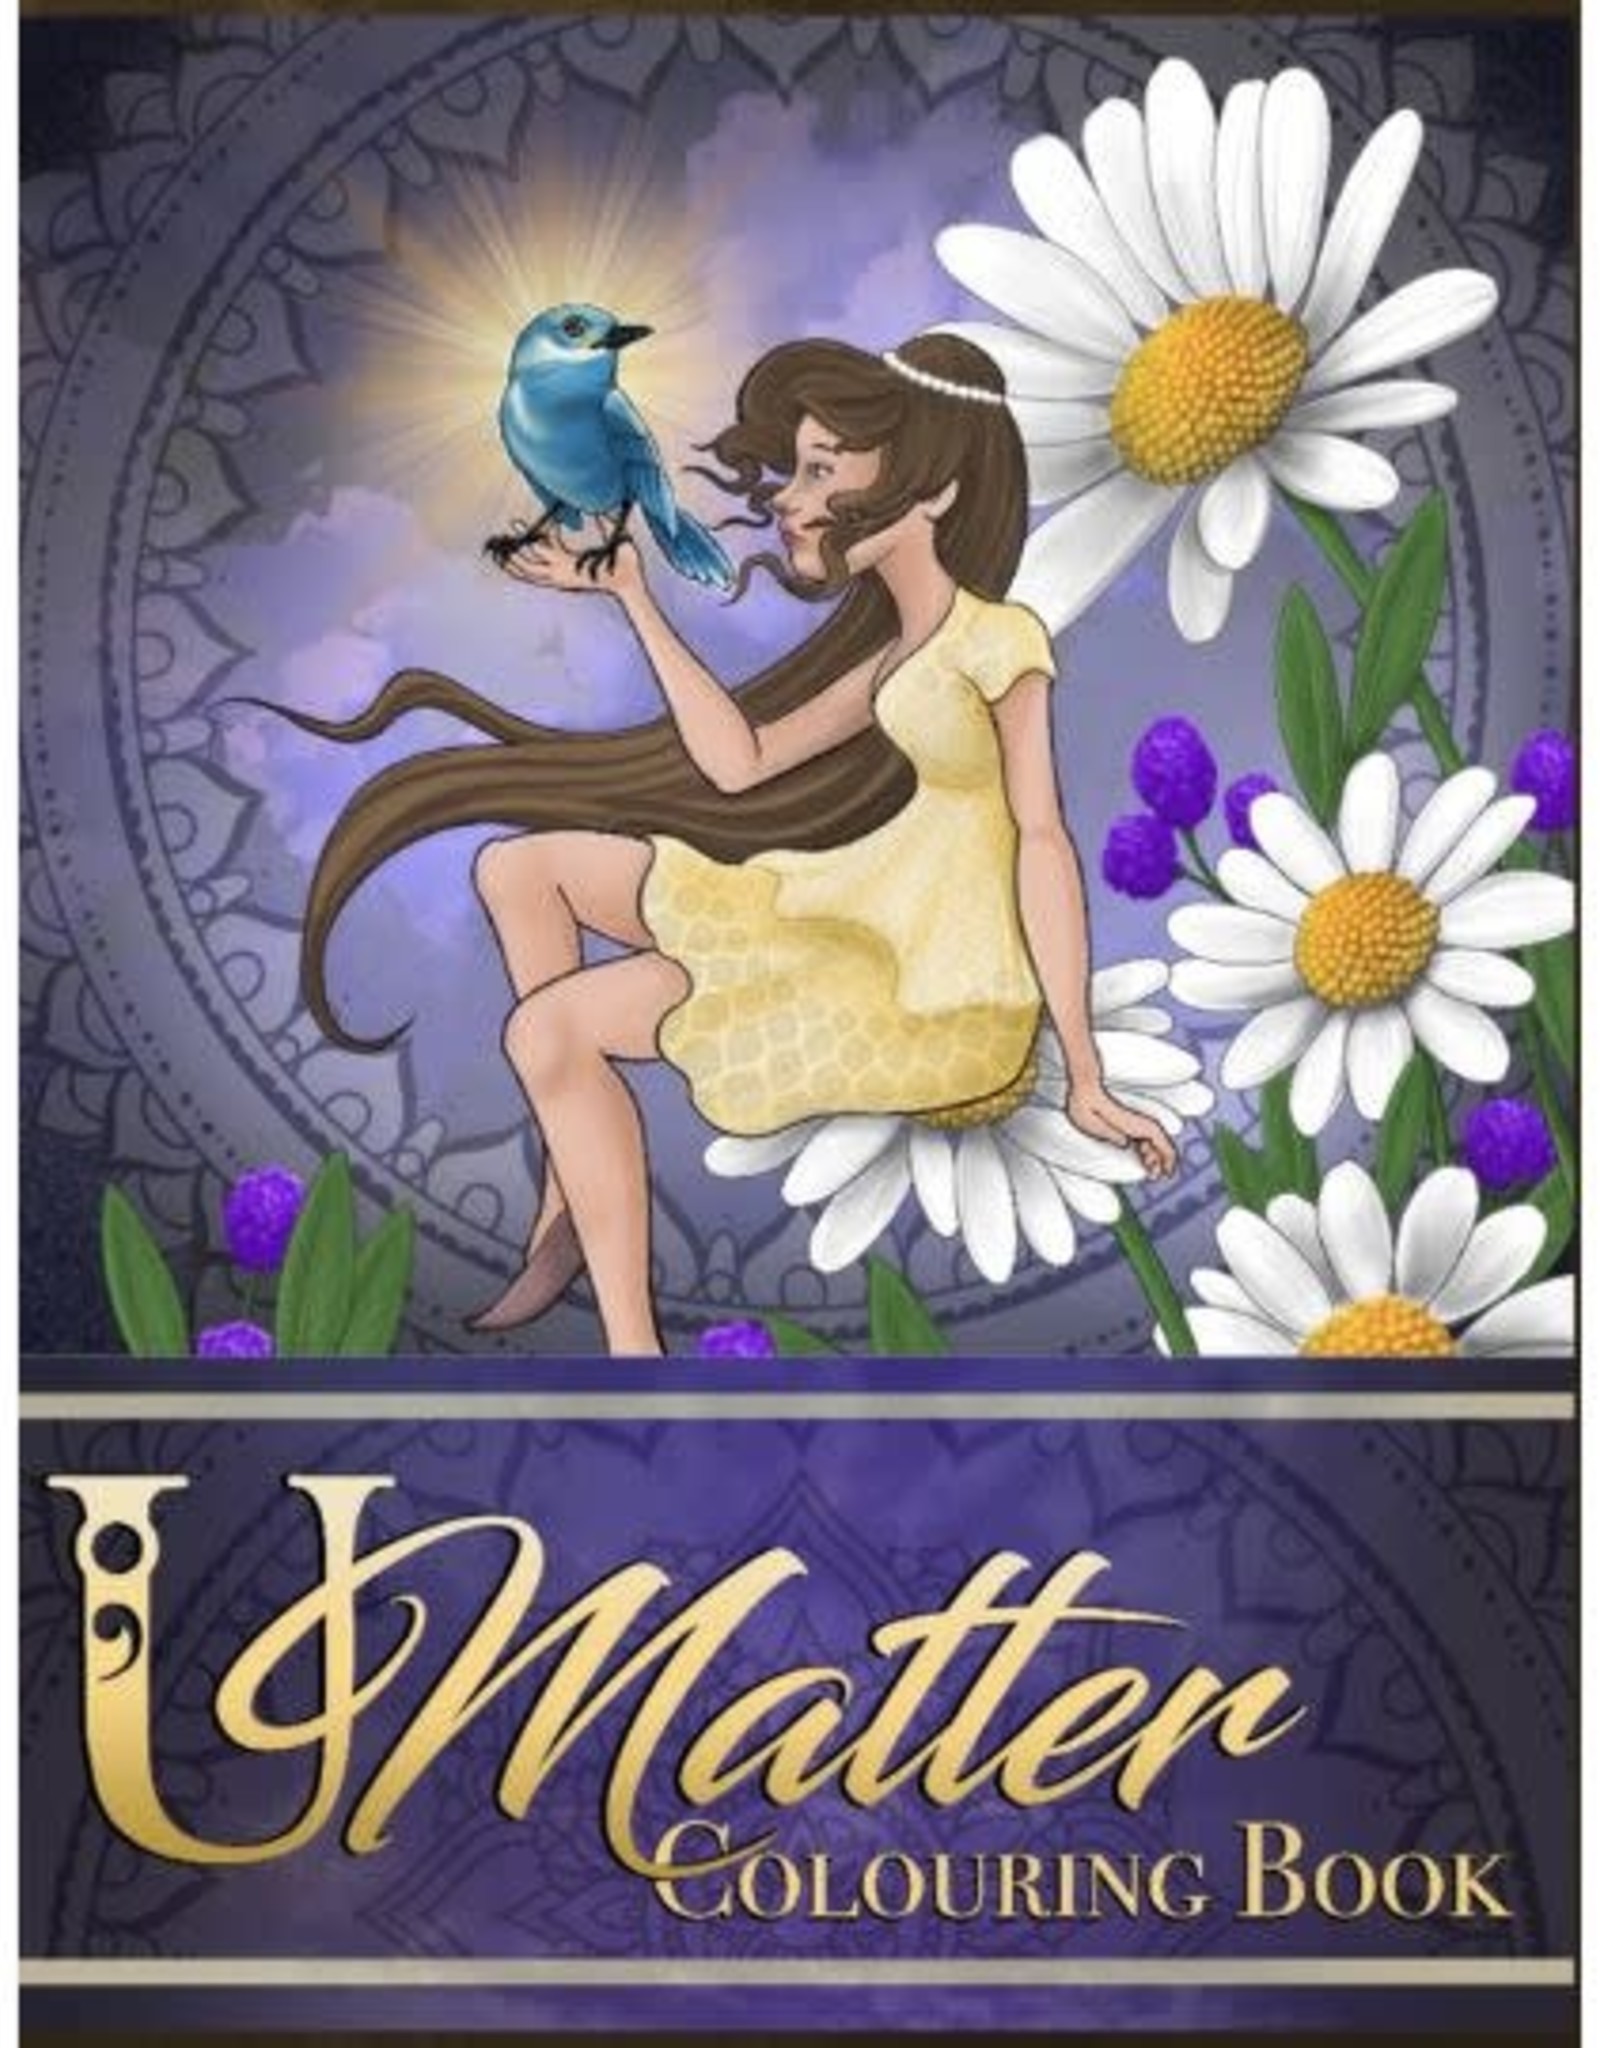 U Matter Colouring Book by Ned Burwell